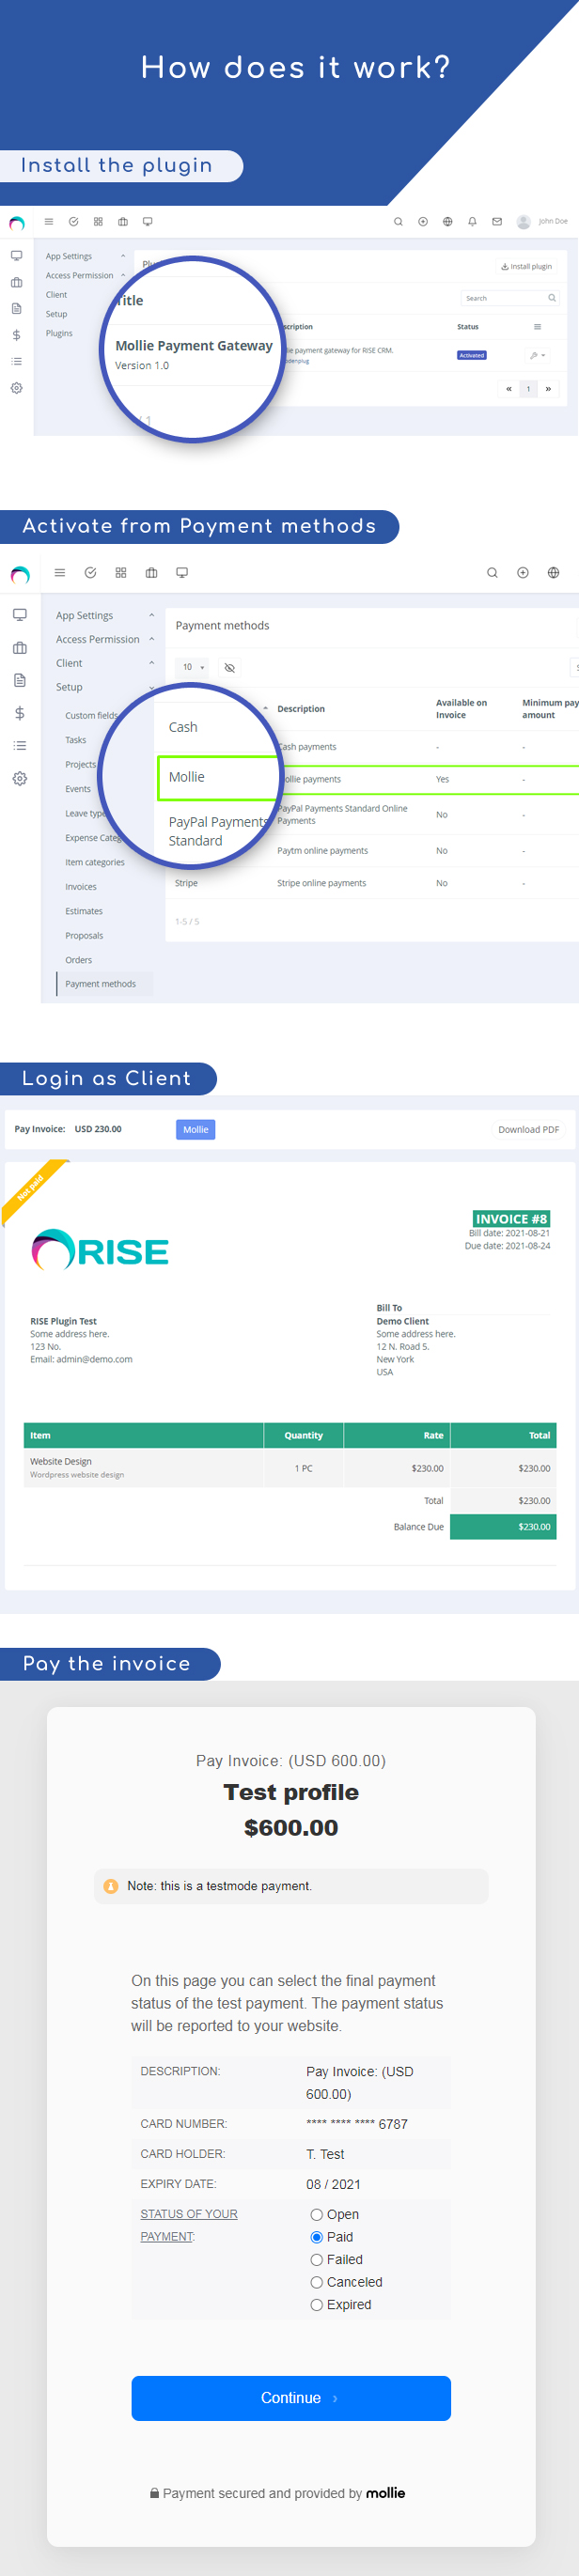 RISE - Ultimate Project Manager & CRM plugin